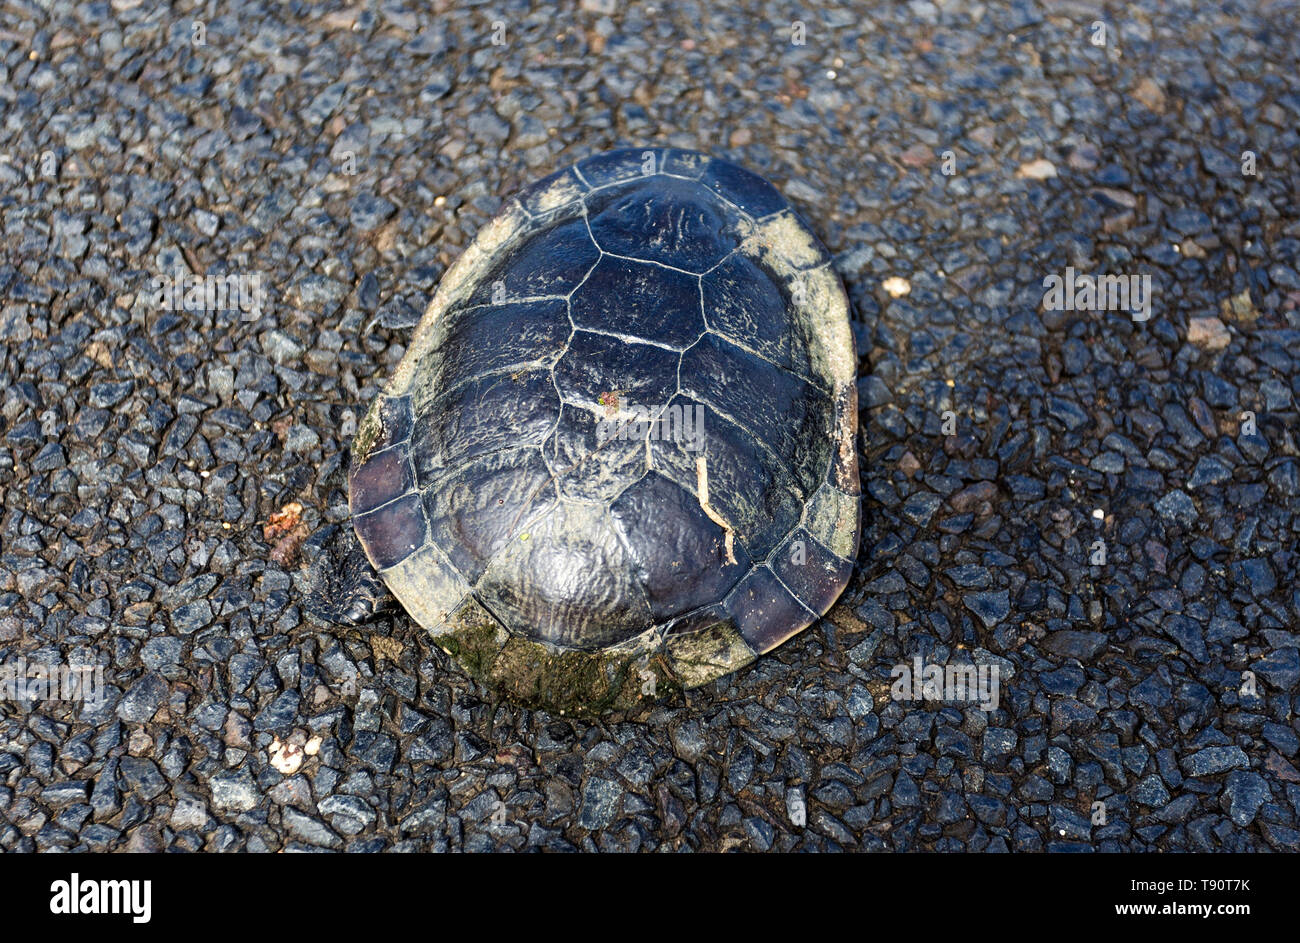 Top view of a freshwater Common Snake-necked Turtle specimen, Chelodina longicollis, found in the middle of the road near Armidale, NSW, Australia Stock Photo